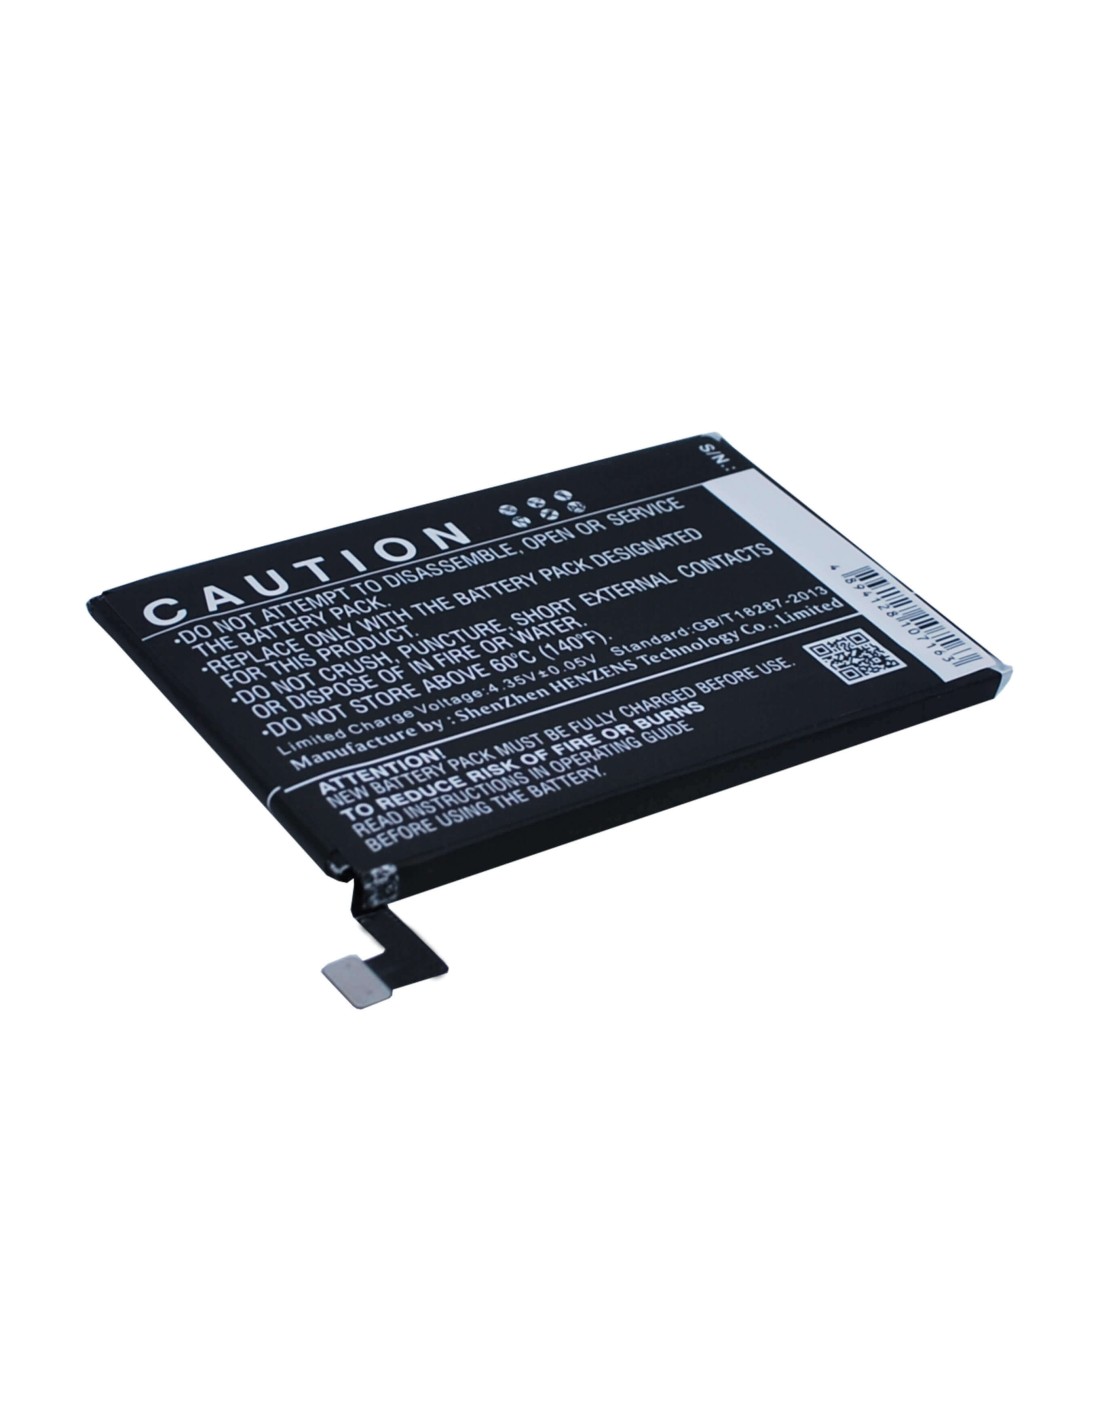 Battery for Oneplus 2, Two, A2005 3.8V, 3300mAh - 12.54Wh